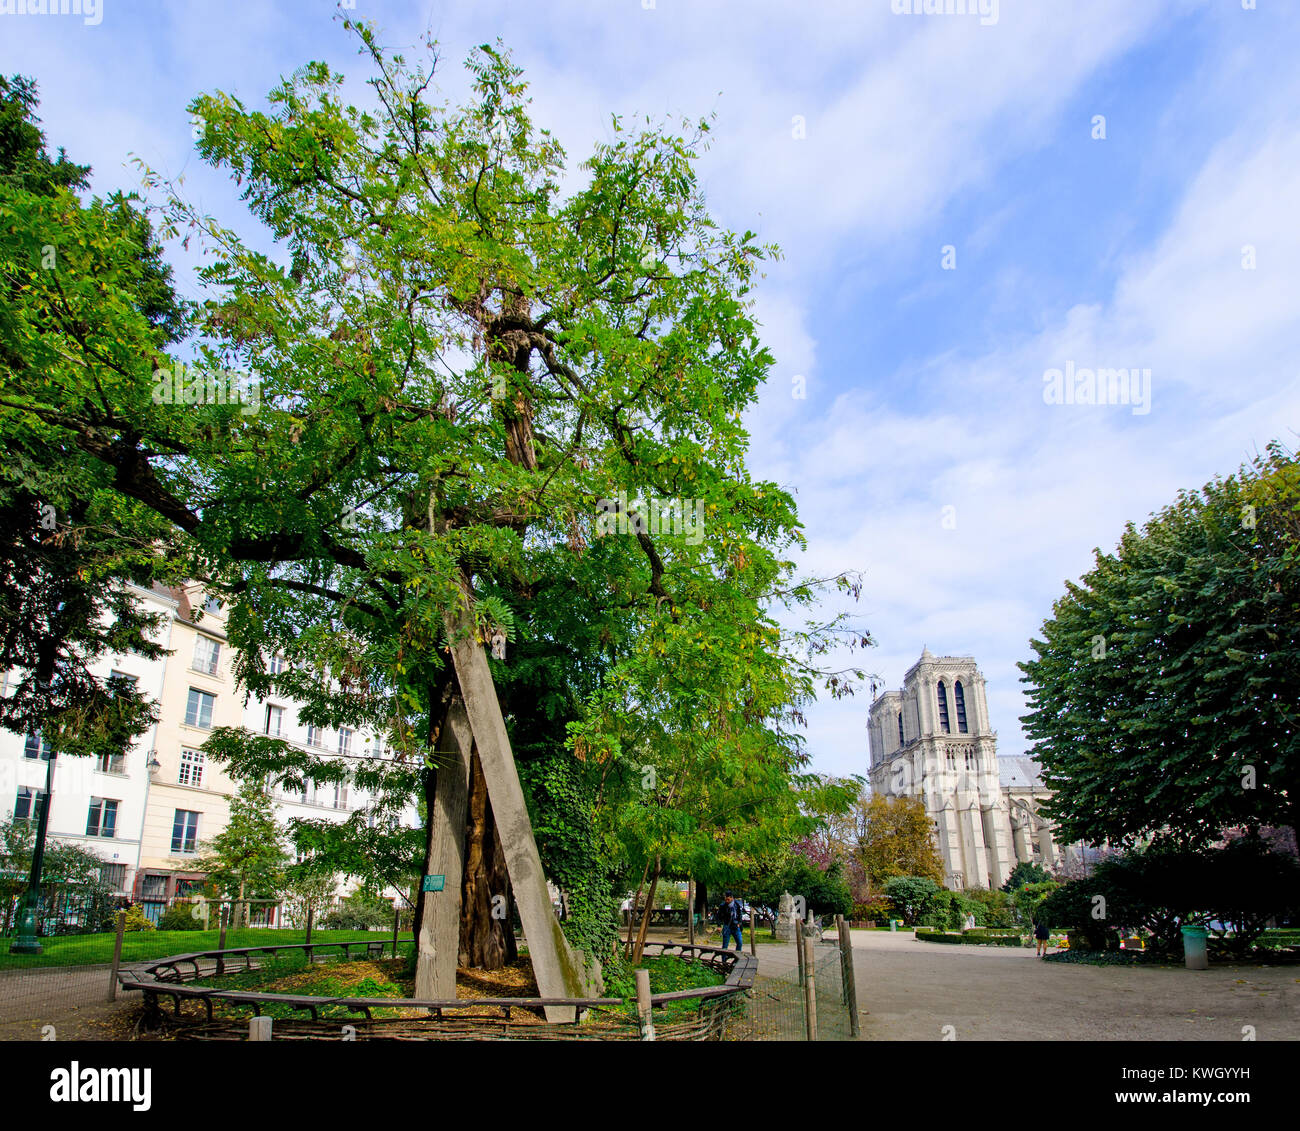 Paris, France. The Oldest Tree in Paris, a Robinia or false Acacia, planted in 1601, by the church of Saint-Julien le Pauvre. Notre Dame behind Stock Photo